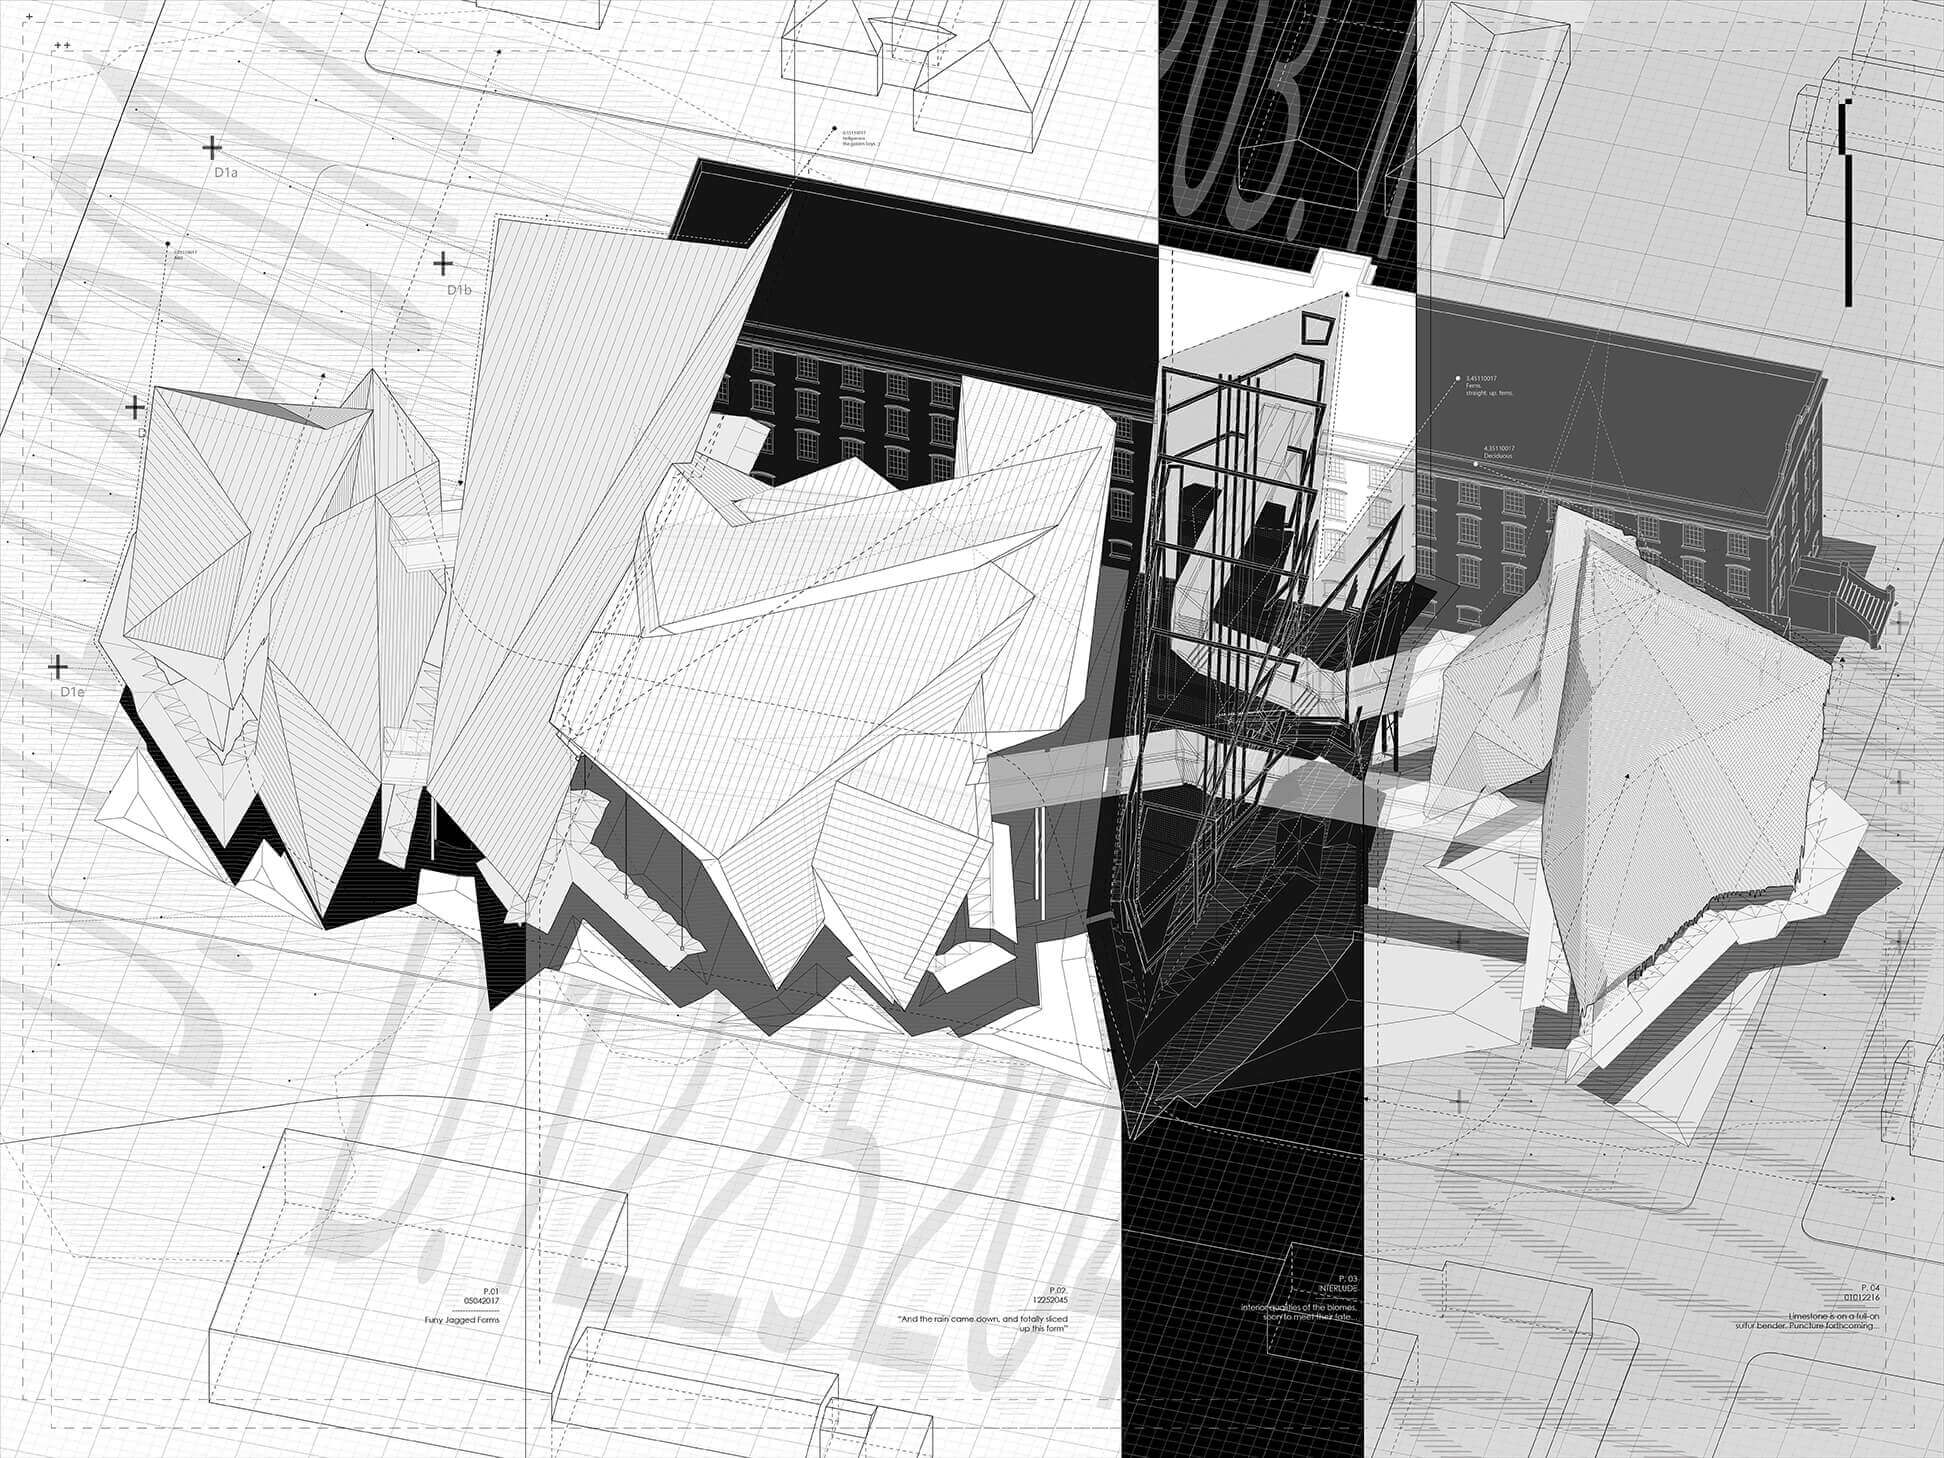 Work by Emily Hertzberg, B.Arch ’17 and Andrew Martens, B.Arch ’17